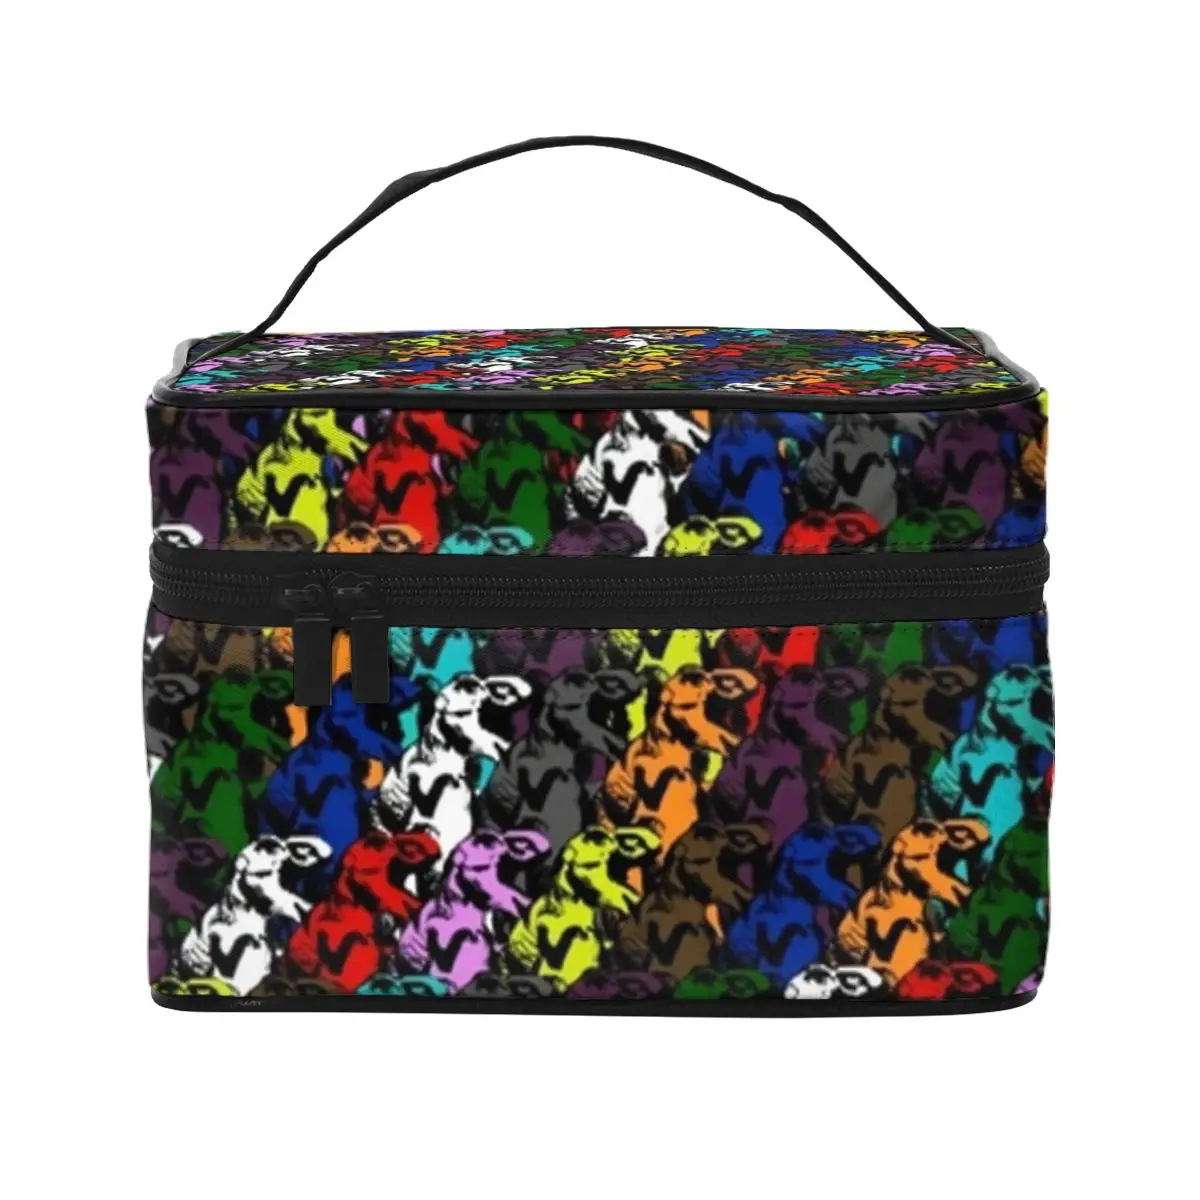 

Dinosaurs Rainbow Cosmetic Bags Abstract Animal Print Woman Storage Organizers with Handle Traveling Multi-purpose Makeup Pouch